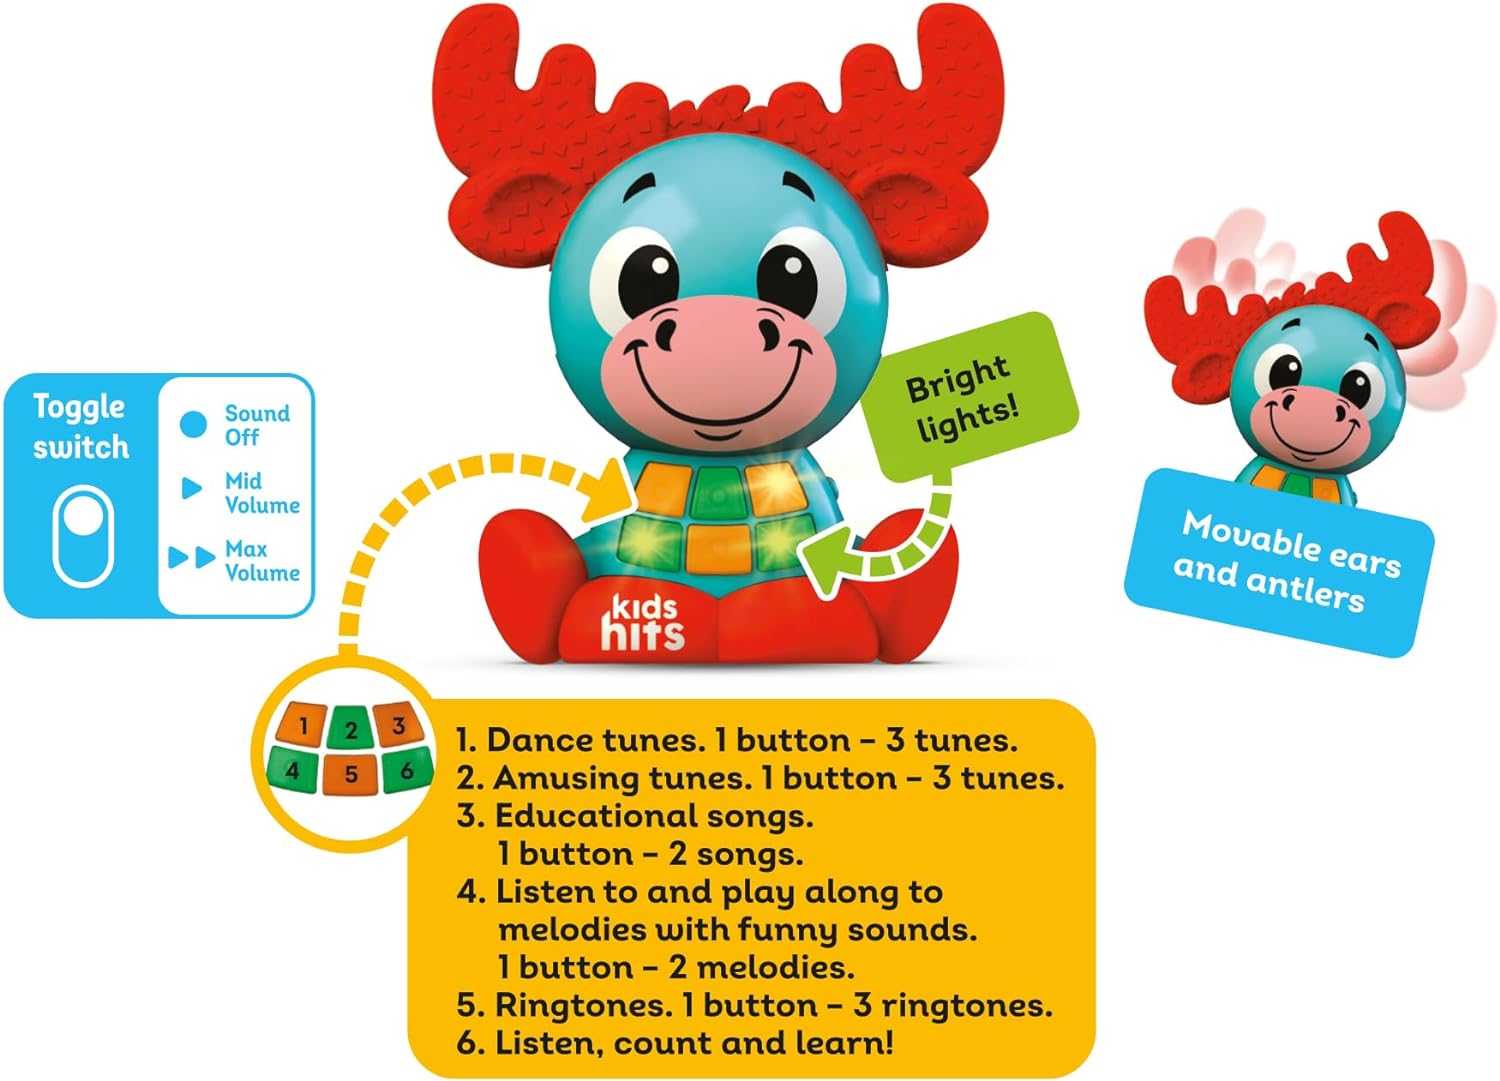 Kids Hits Babykins Moose Interactive Toy Spark Joy and Learning for Kids 2 Years and Up - Bright Lights, Playful Tunes, and Educational Fun!